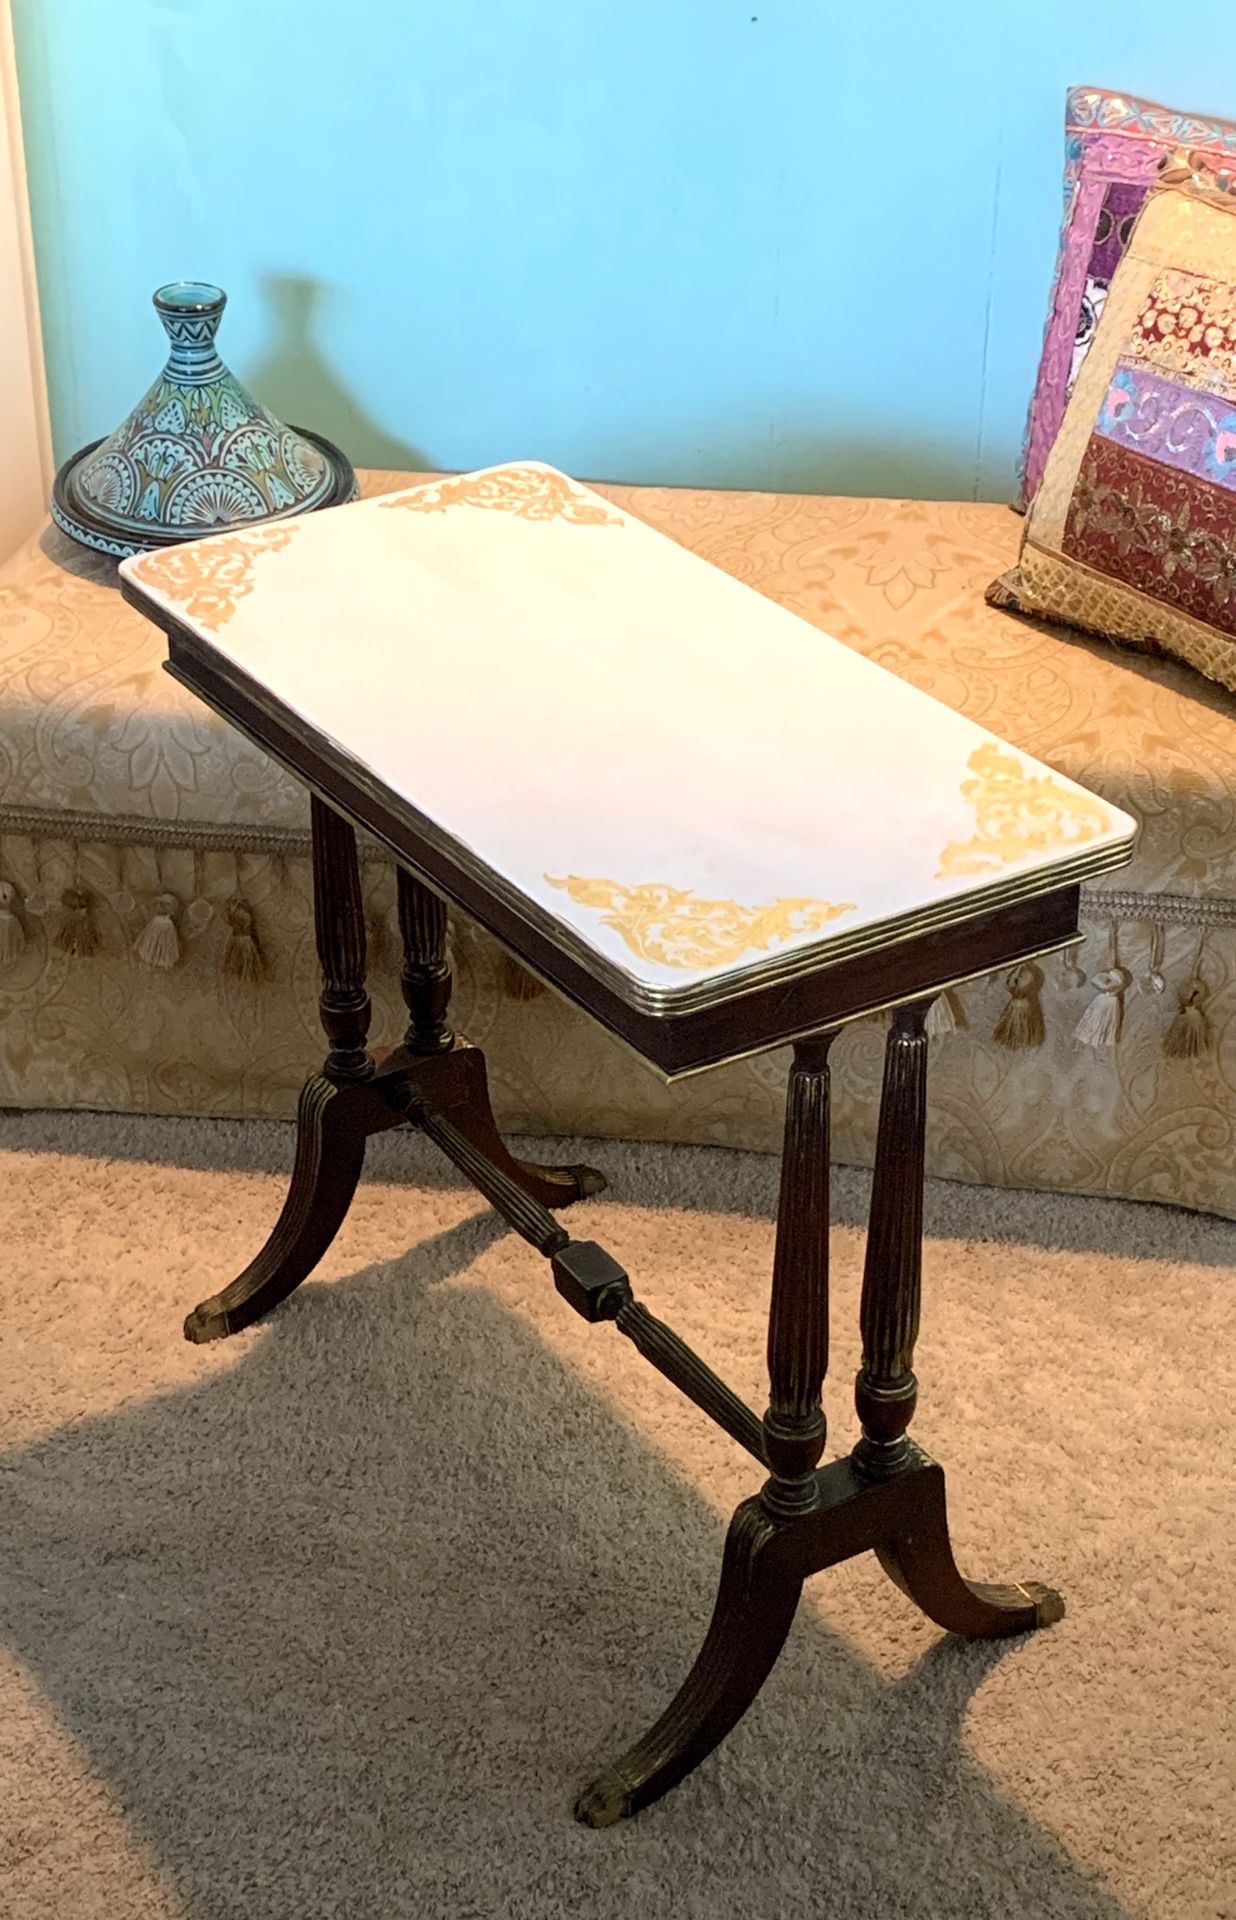 Redesigned Antique Duncan Phyfe Table 26”x13”x24”❗️ Check out our other items❗️